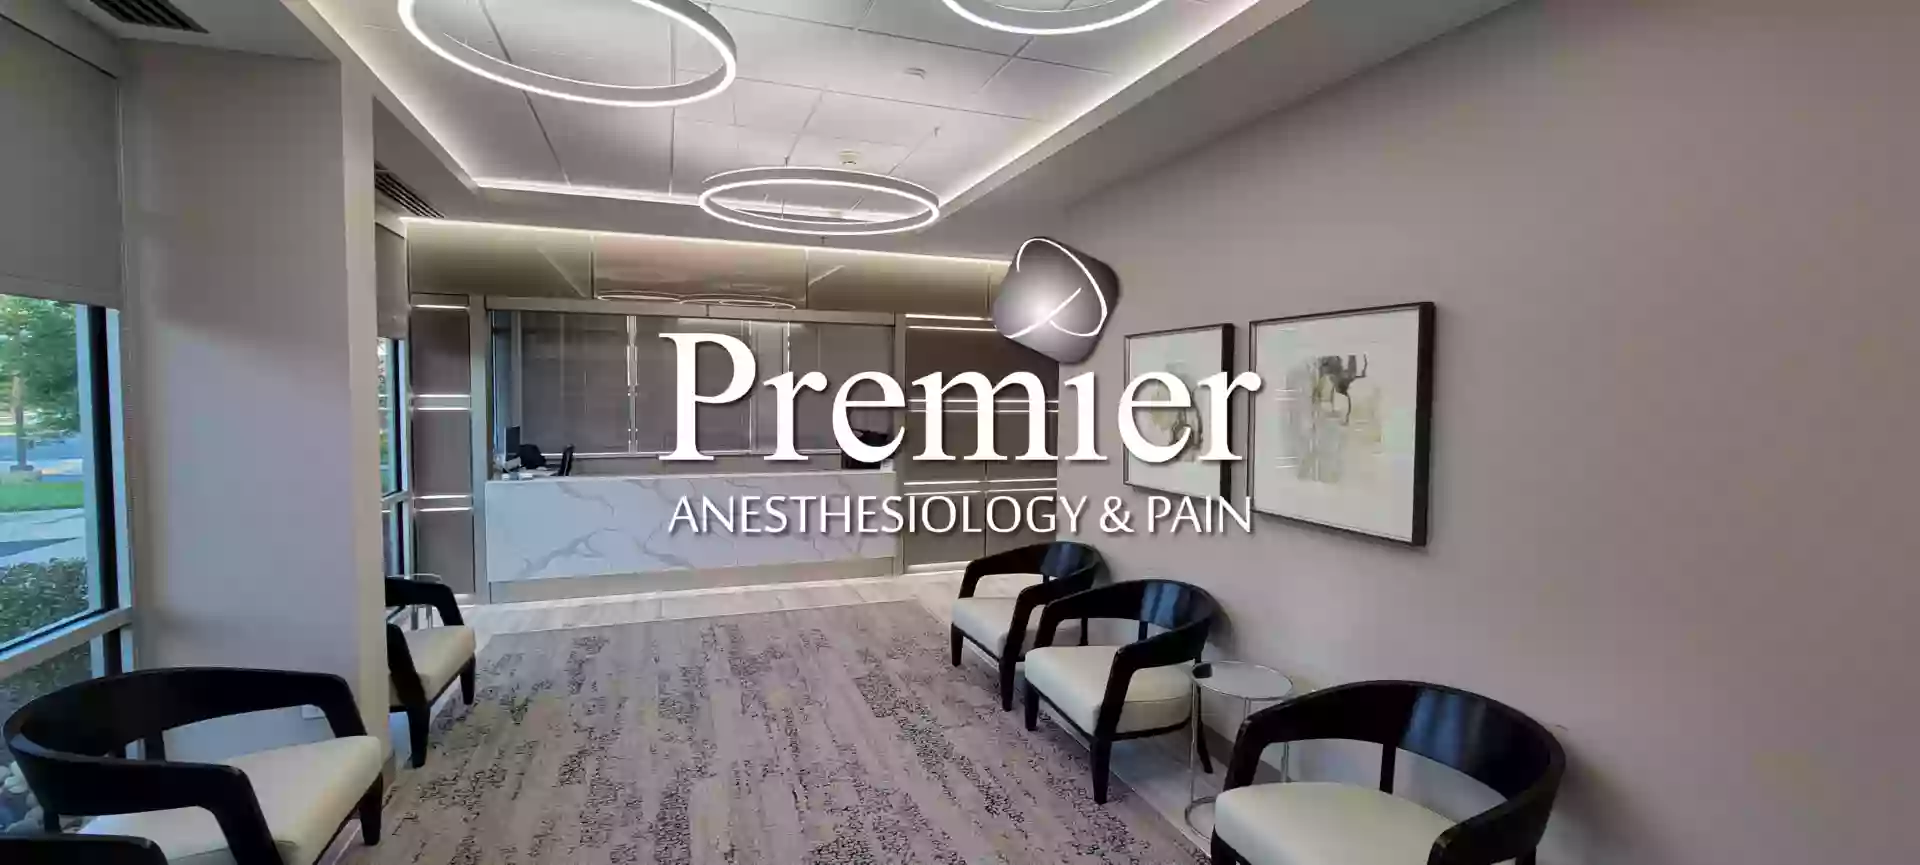 Premier Anesthesia and Pain Management